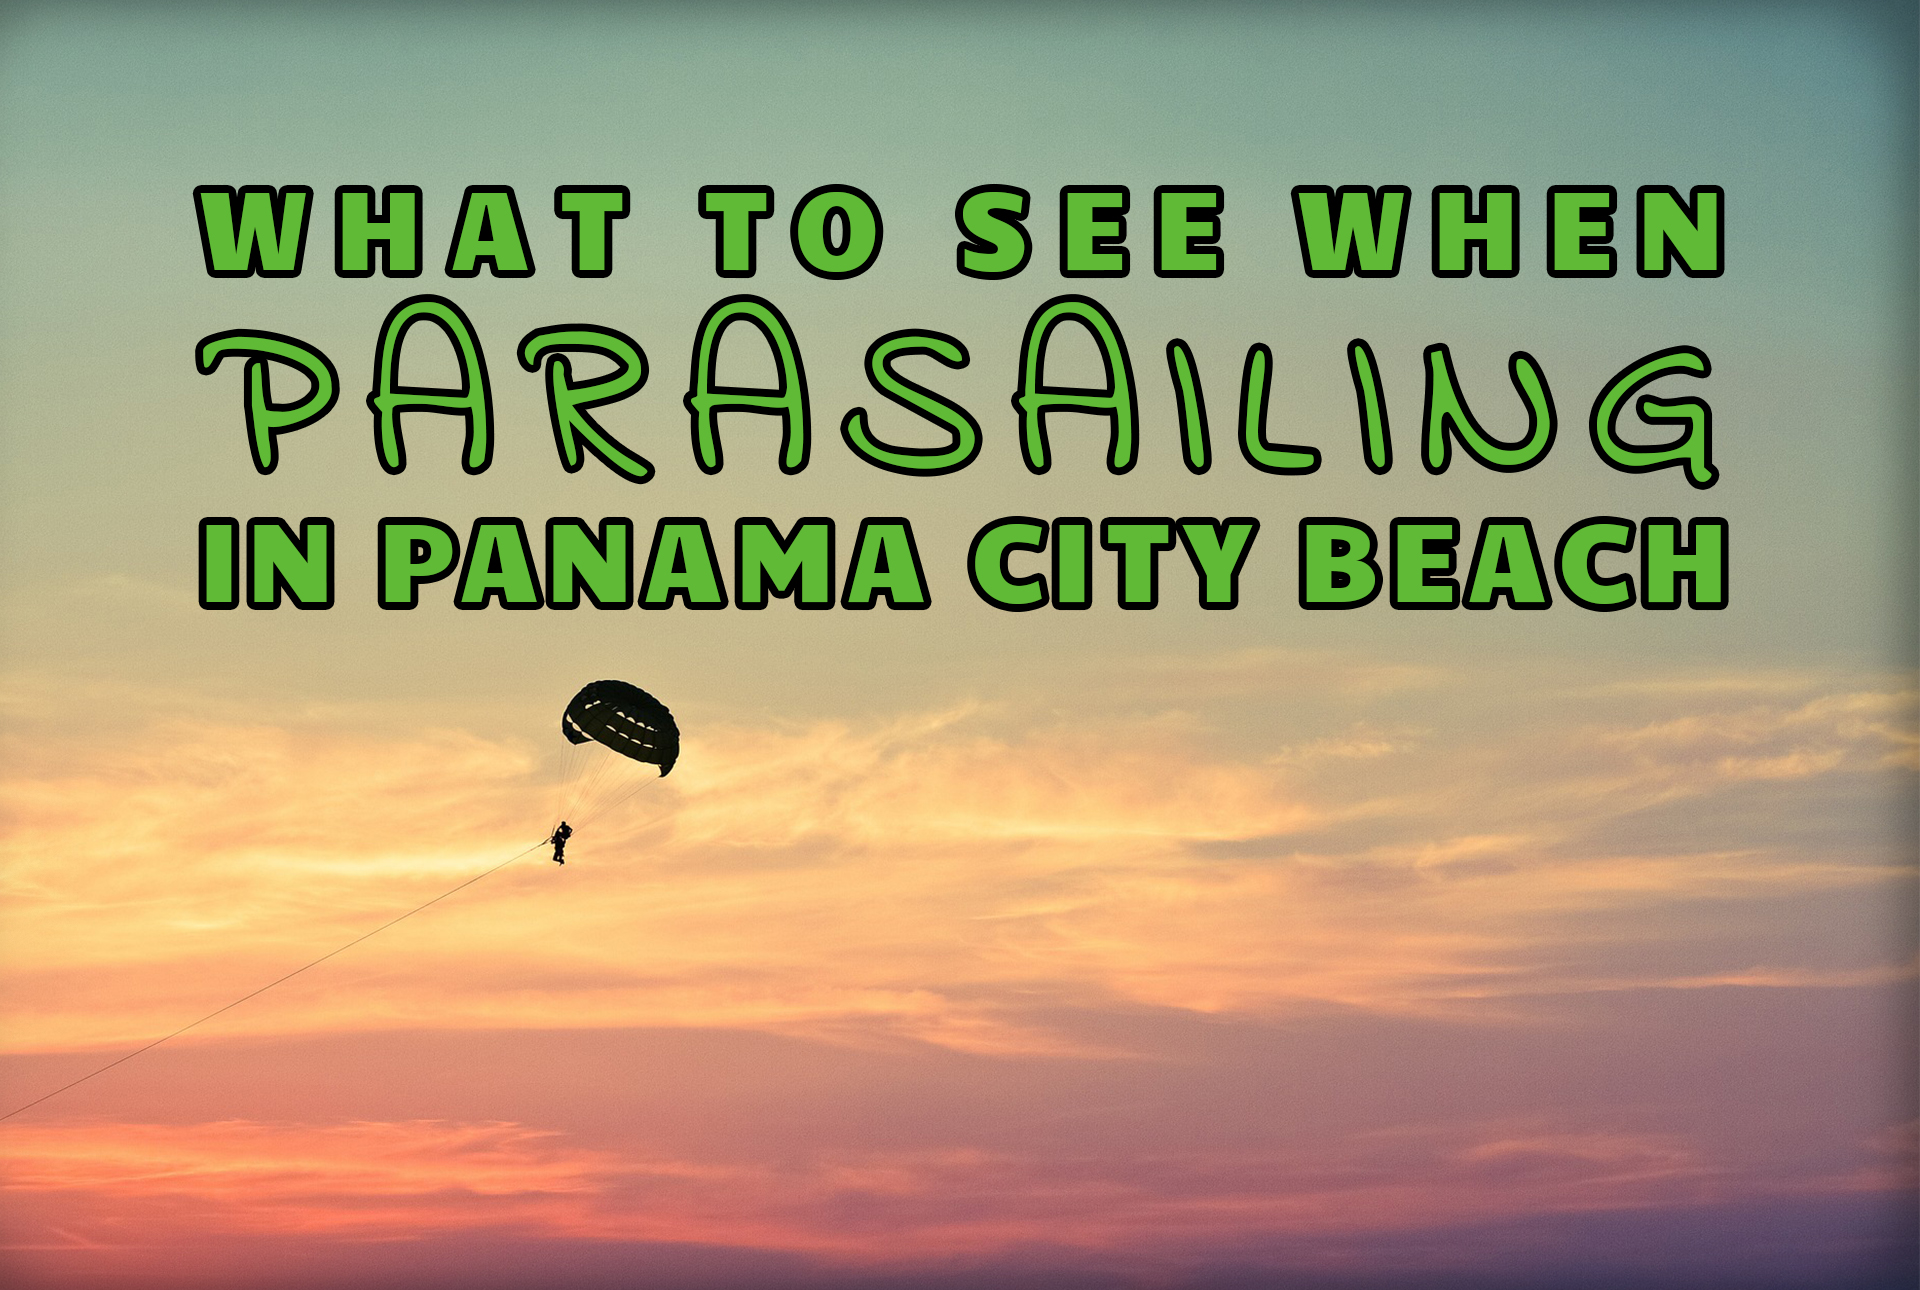 "What to See When Parasailing in Panama City Beach" over an image of someone parasailing